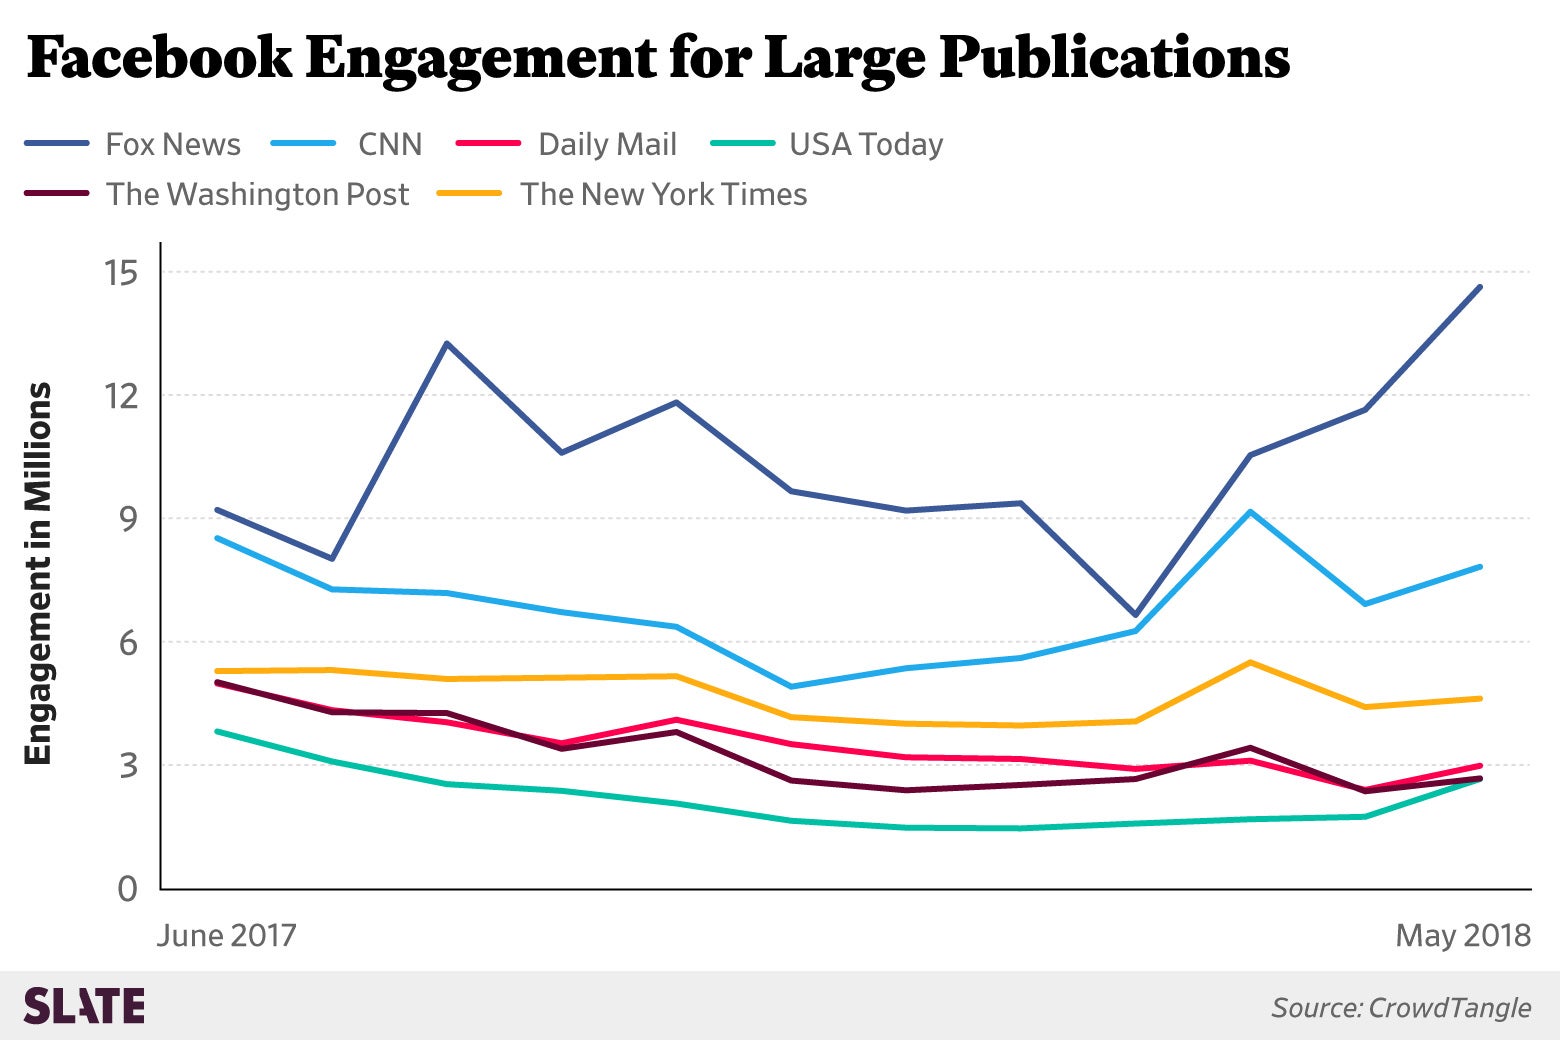 A chart shows Facebook engagement for larger publications, including Fox News, CNN, and the Daily Mail. Fox News notably trends up over the past few months.